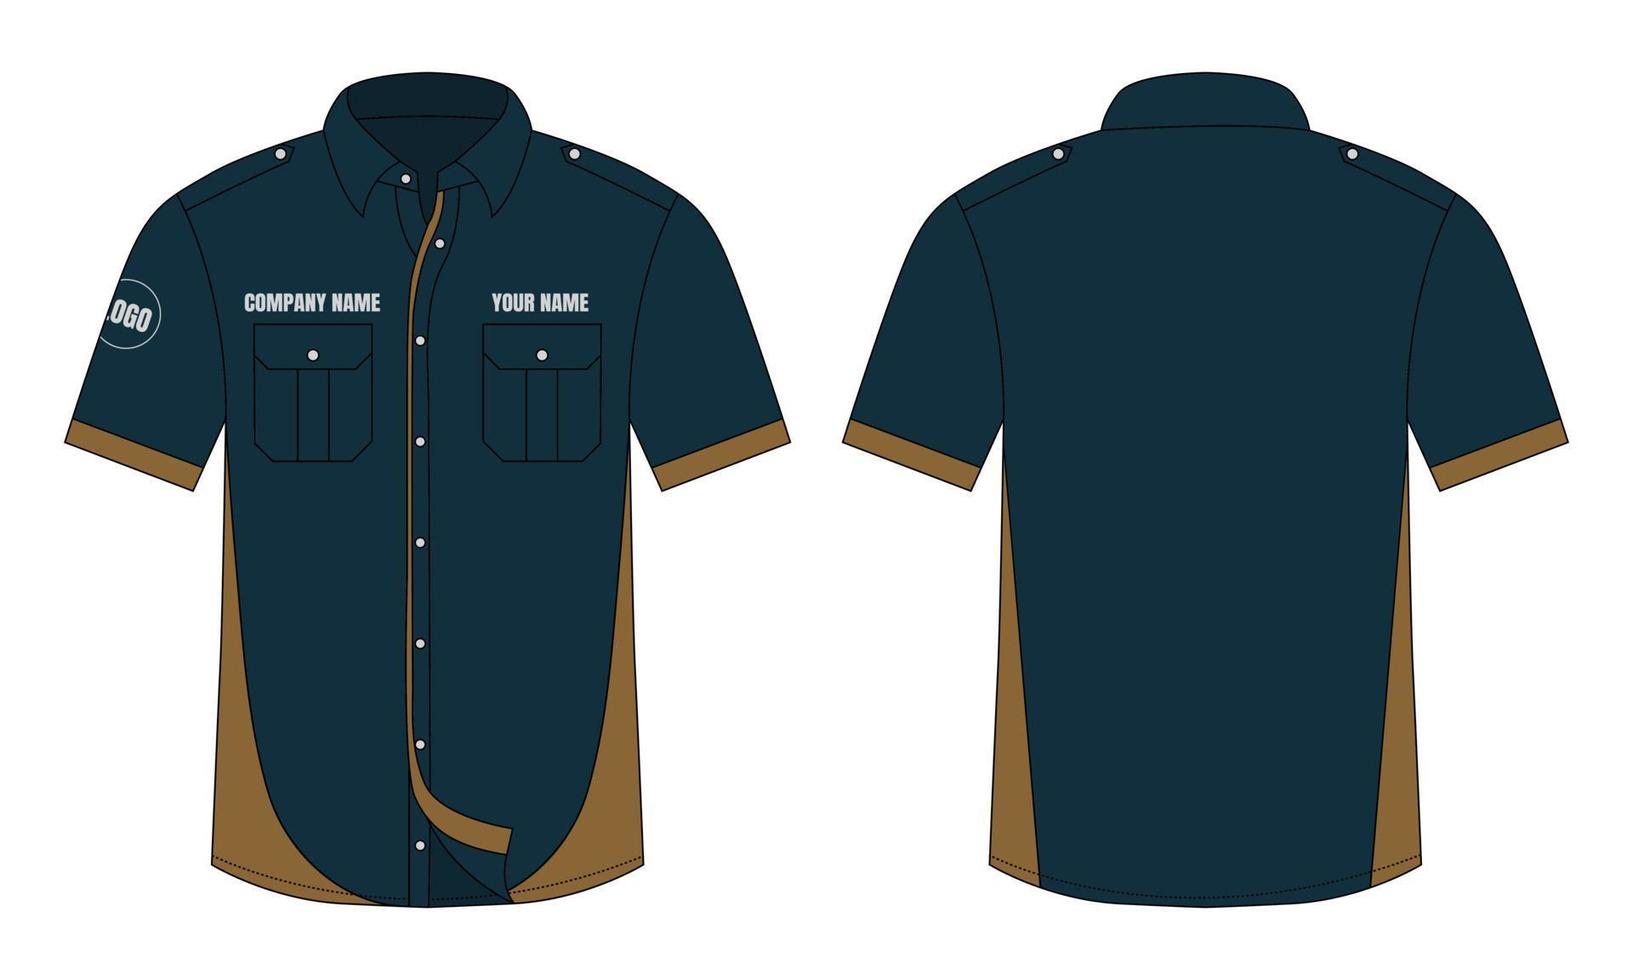 Office shirt mockup front and back view. Vector illustration